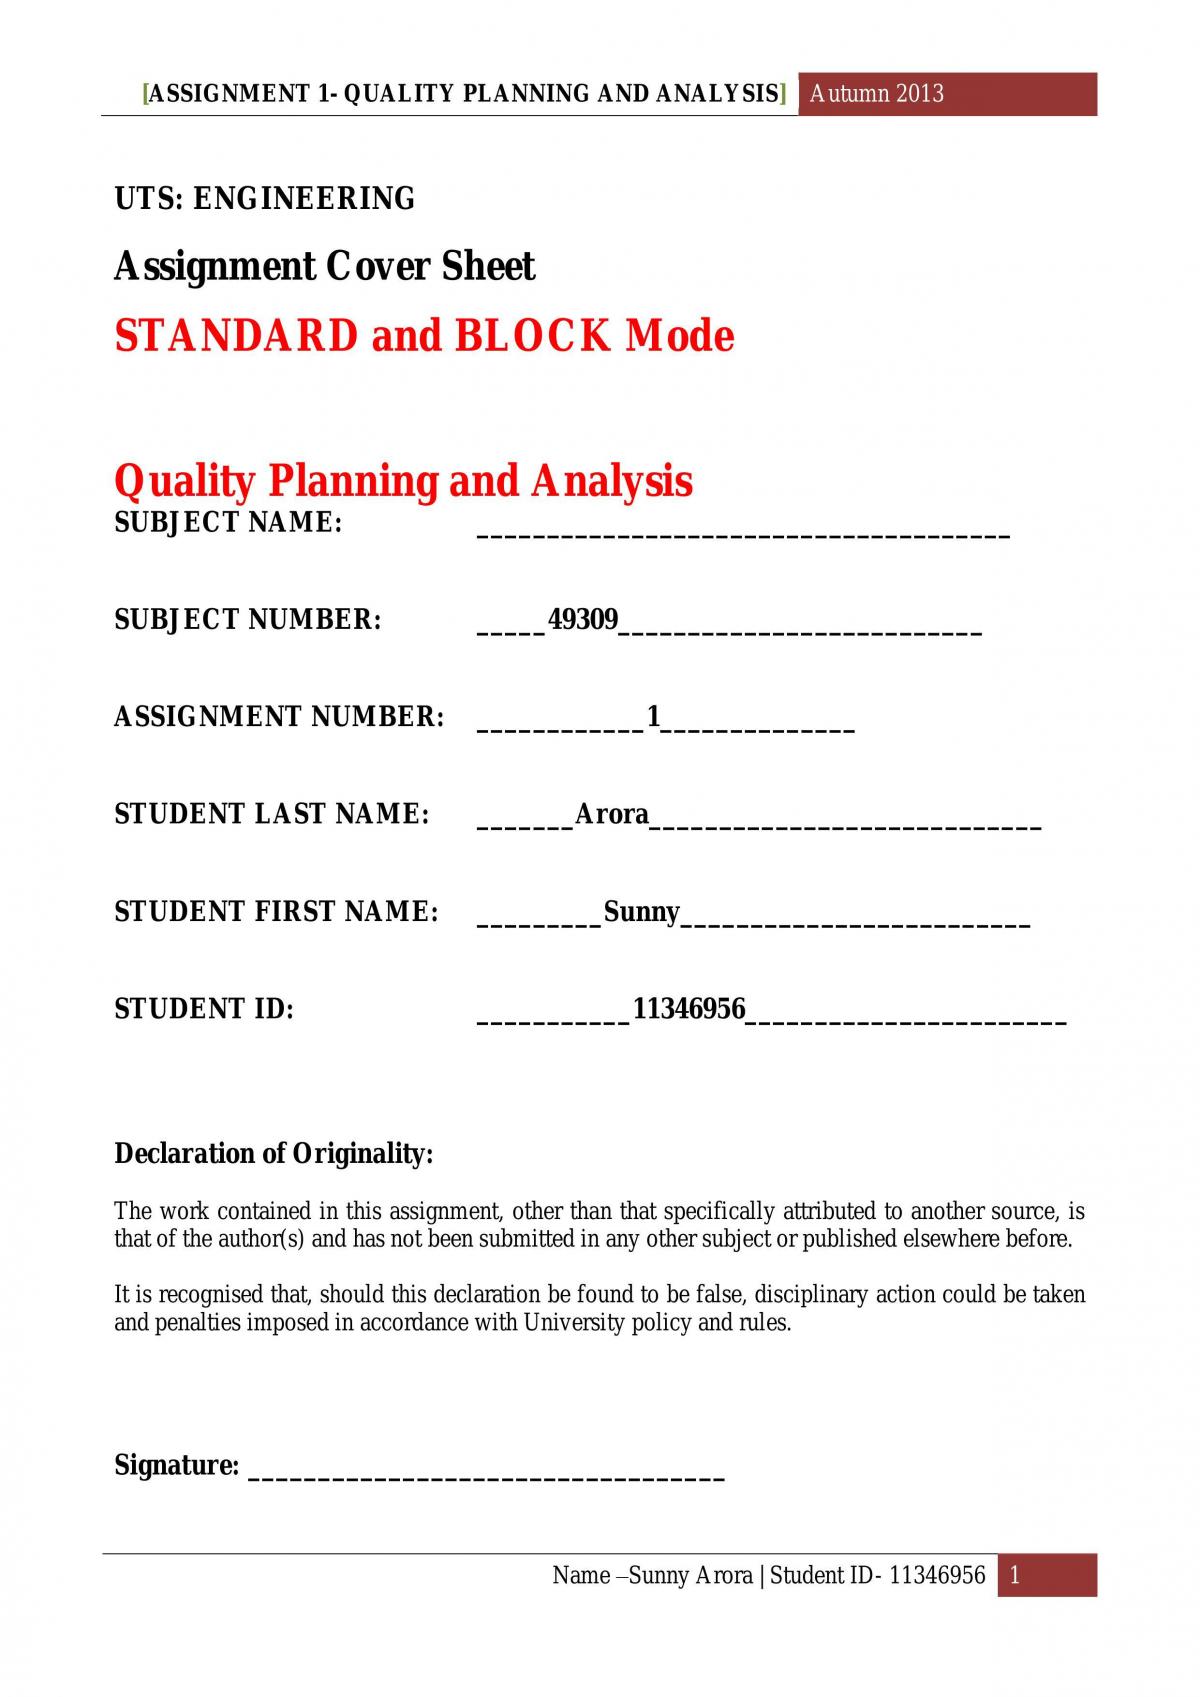 Assignment - quality planning and analysis - Page 1